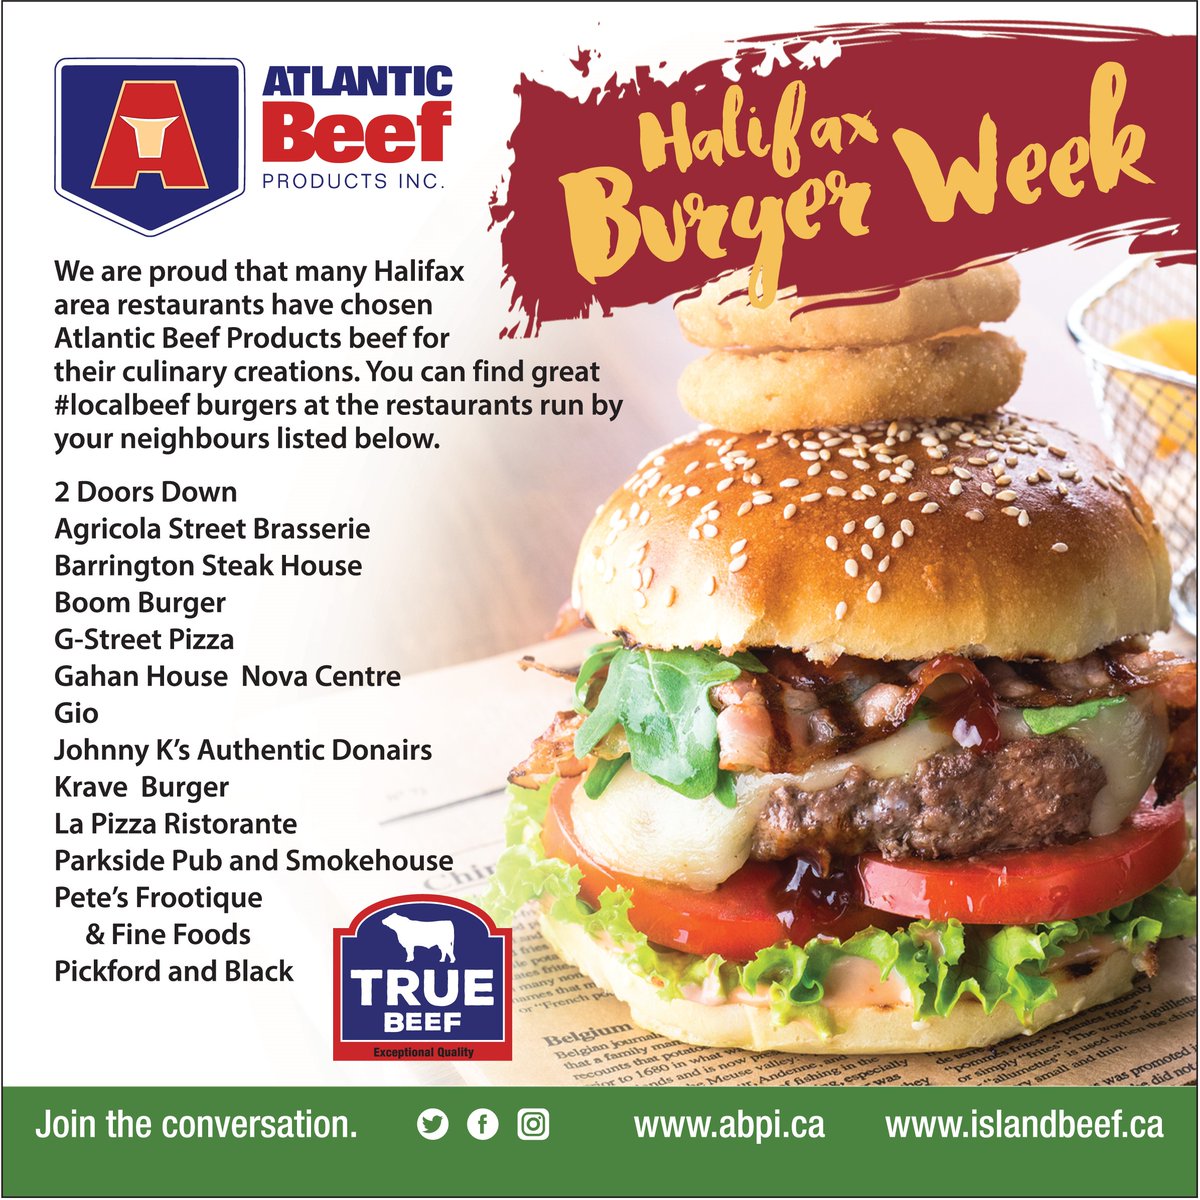 #hfxburgerweek is shaping up to be #awesome #localbeef #tastesensations at these great spots!